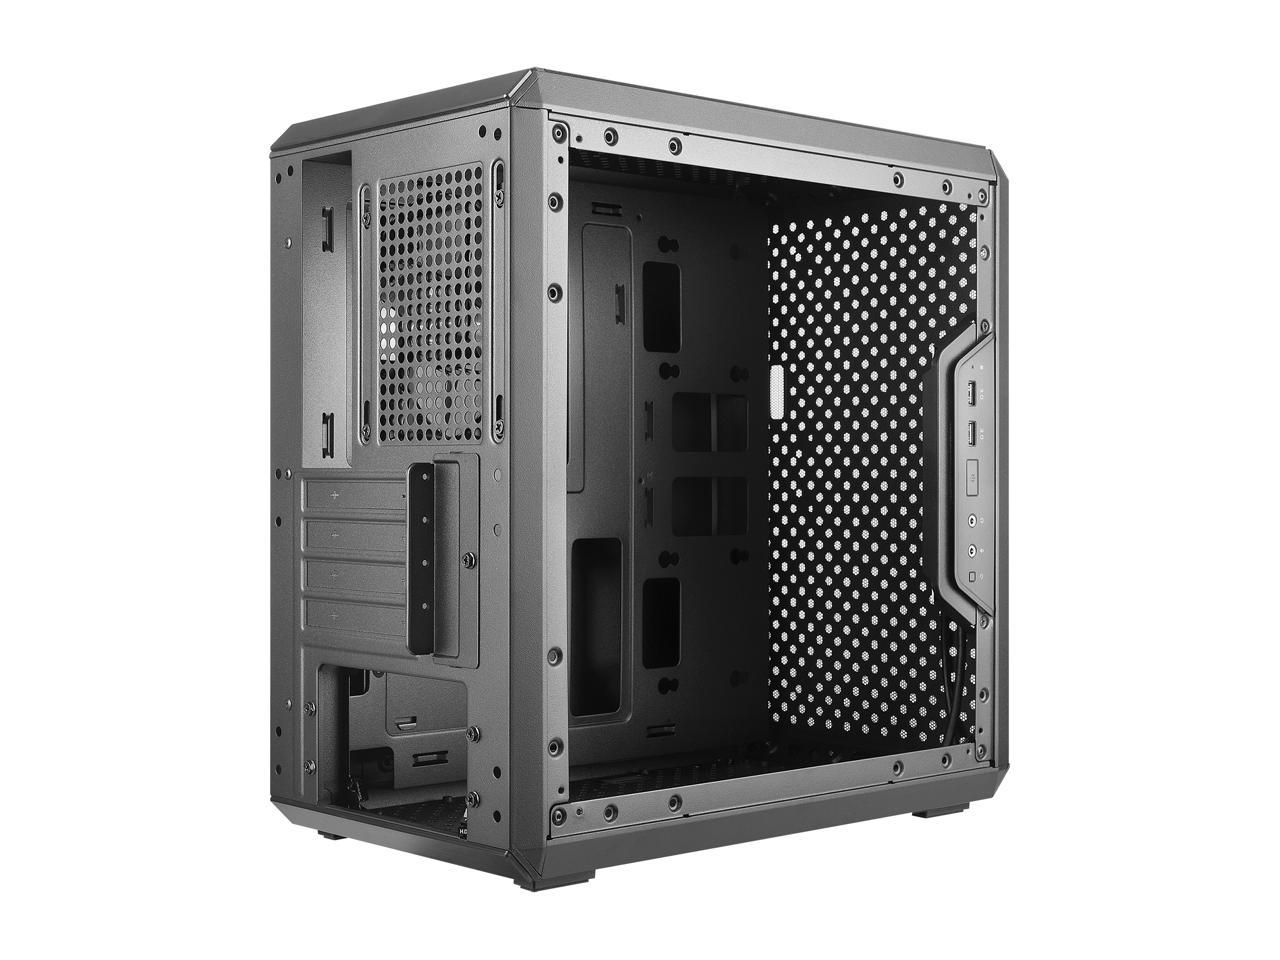 Agriculture rack Lying Cooler Master MasterBox Q300L Micro ATX Tower w/ Dust Filter - Newegg.com